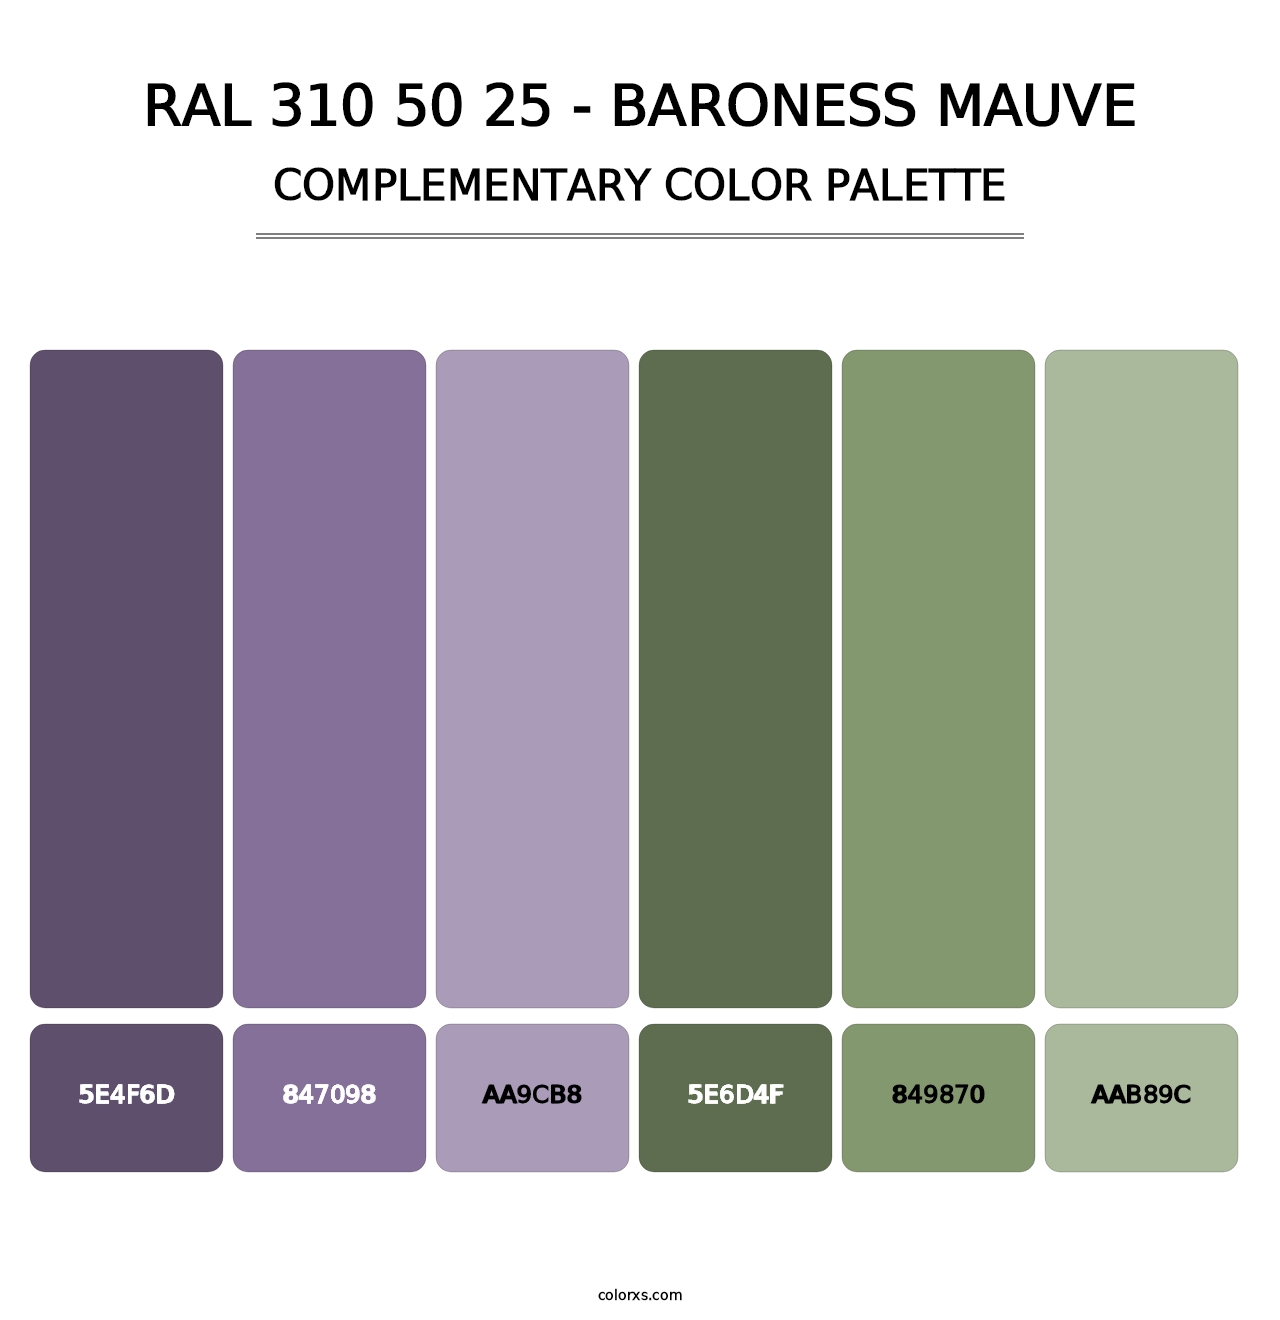 RAL 310 50 25 - Baroness Mauve - Complementary Color Palette